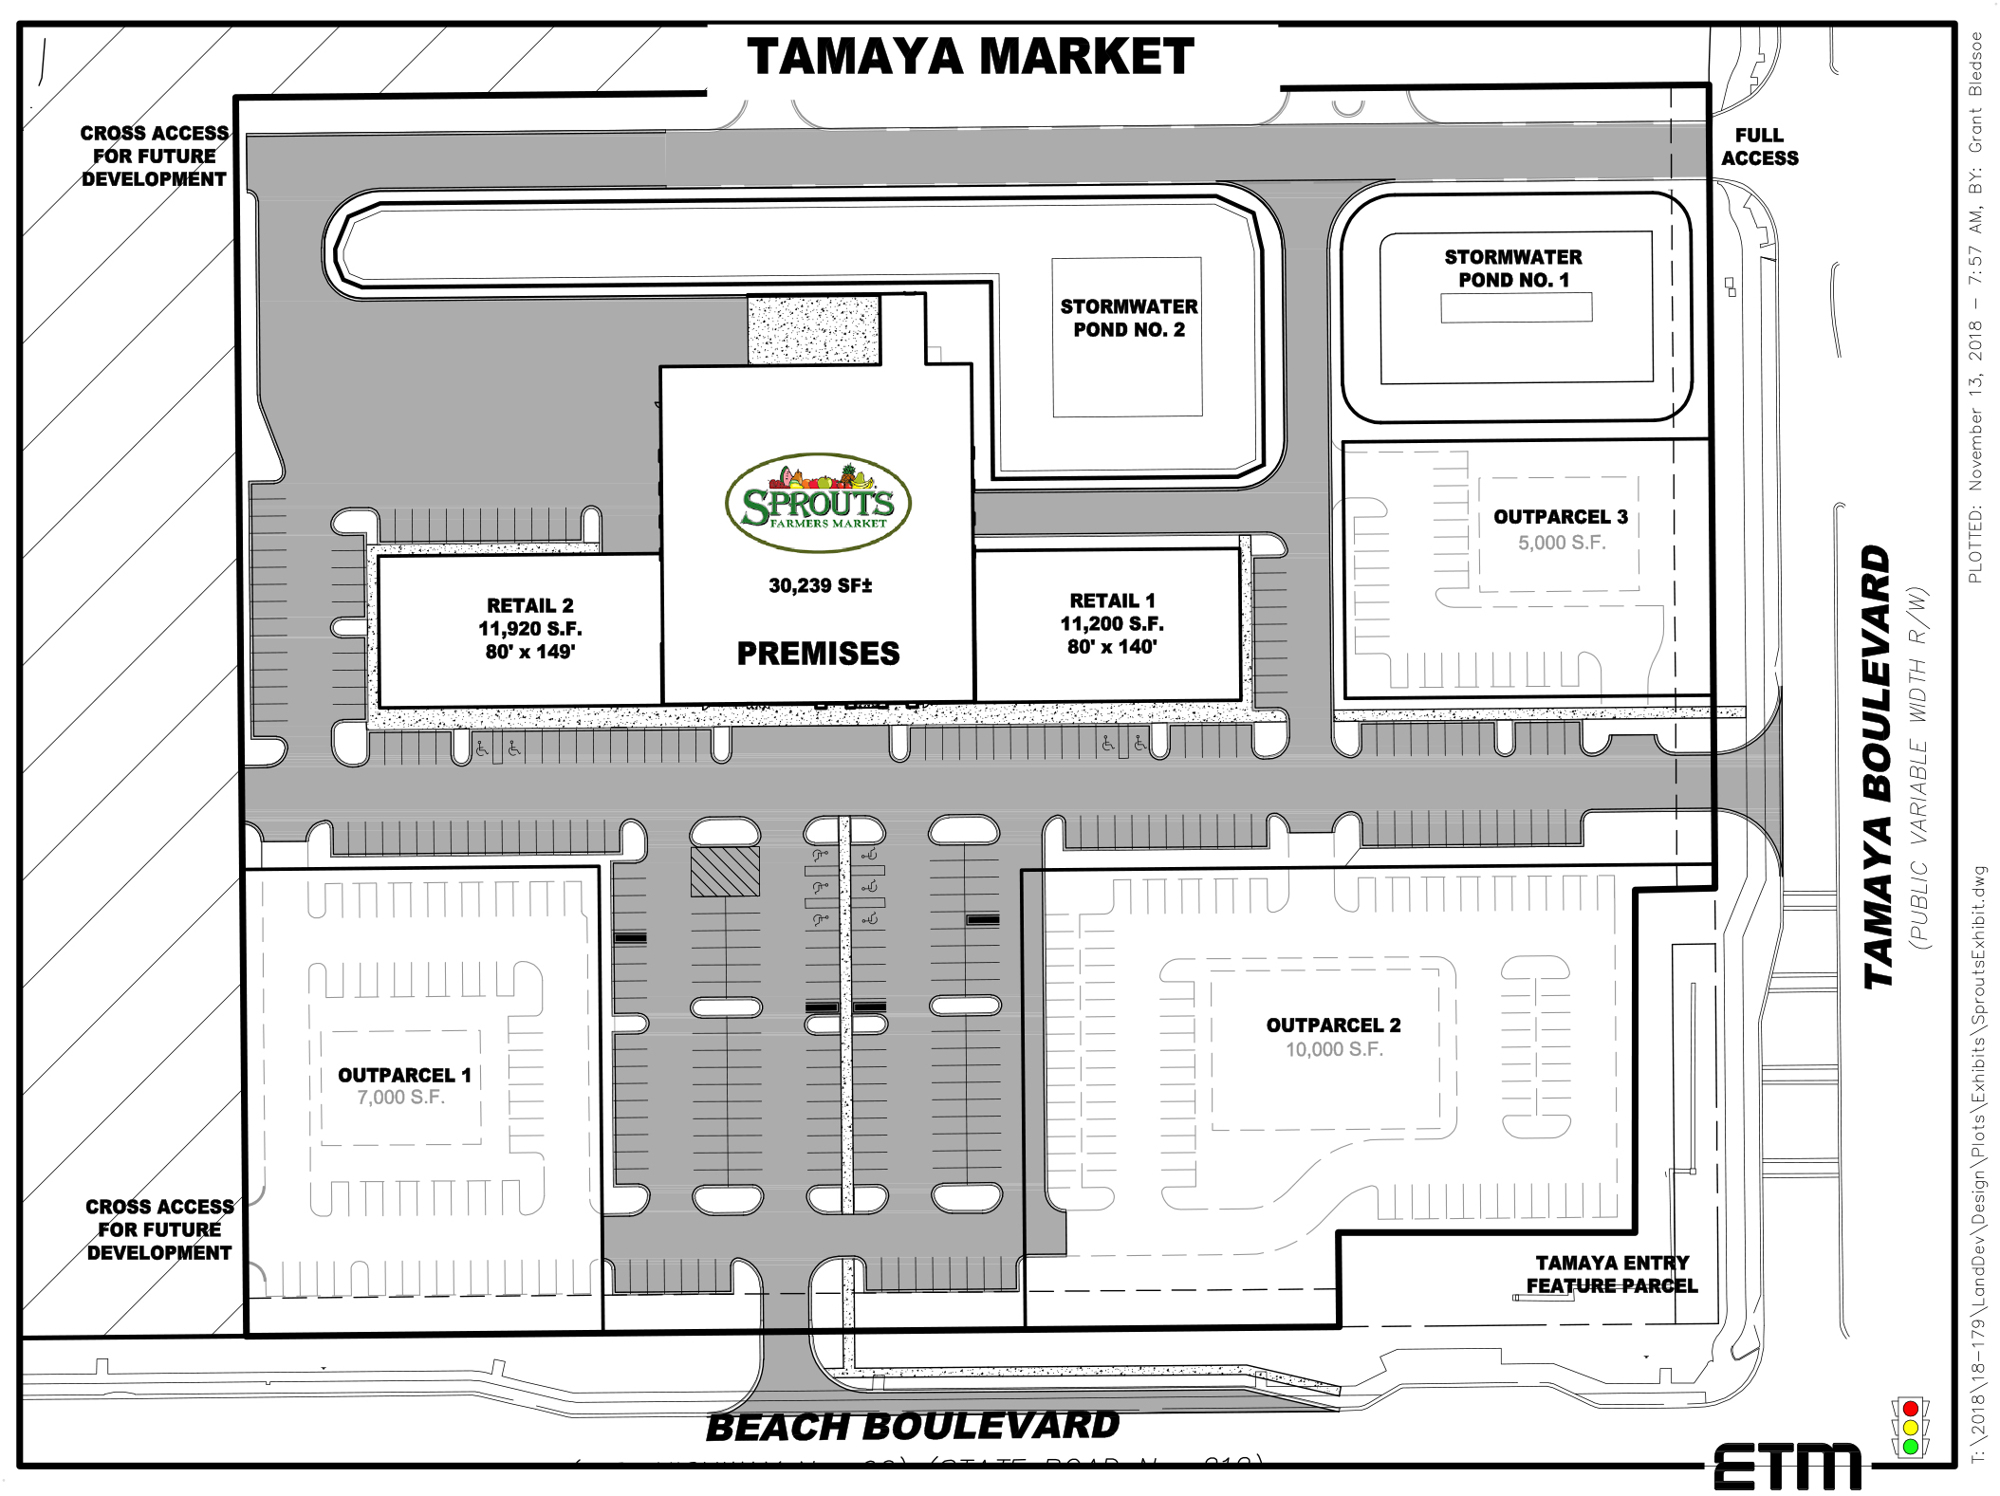 The site plan for Tamaya Market shows the Sprouts Farmer’s Market grocery store and two smaller retail buildings. Three outparcels also are available.